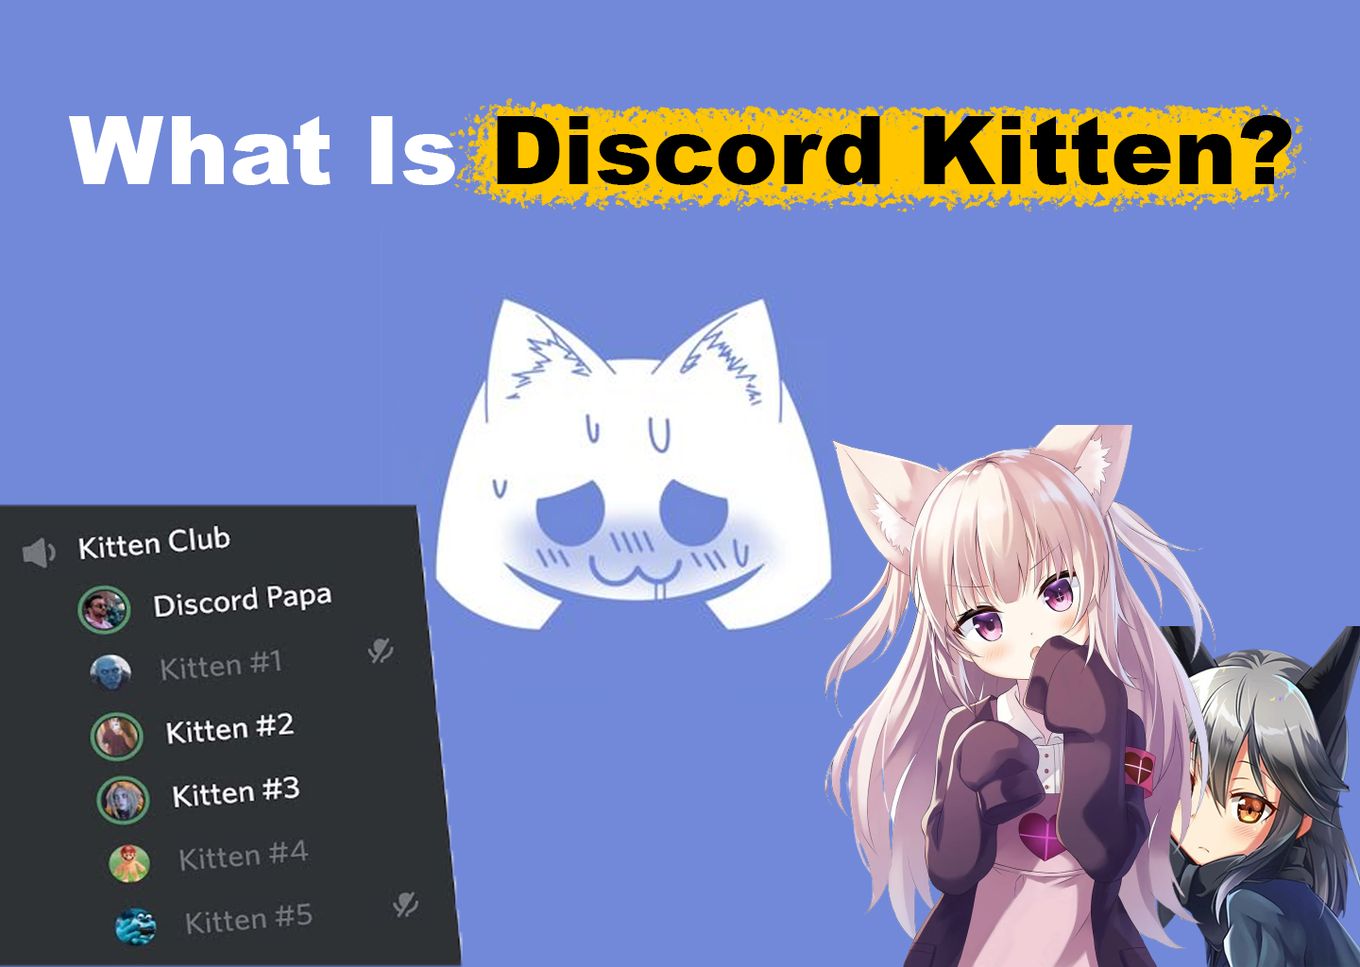 How To Become A Discord Kitten